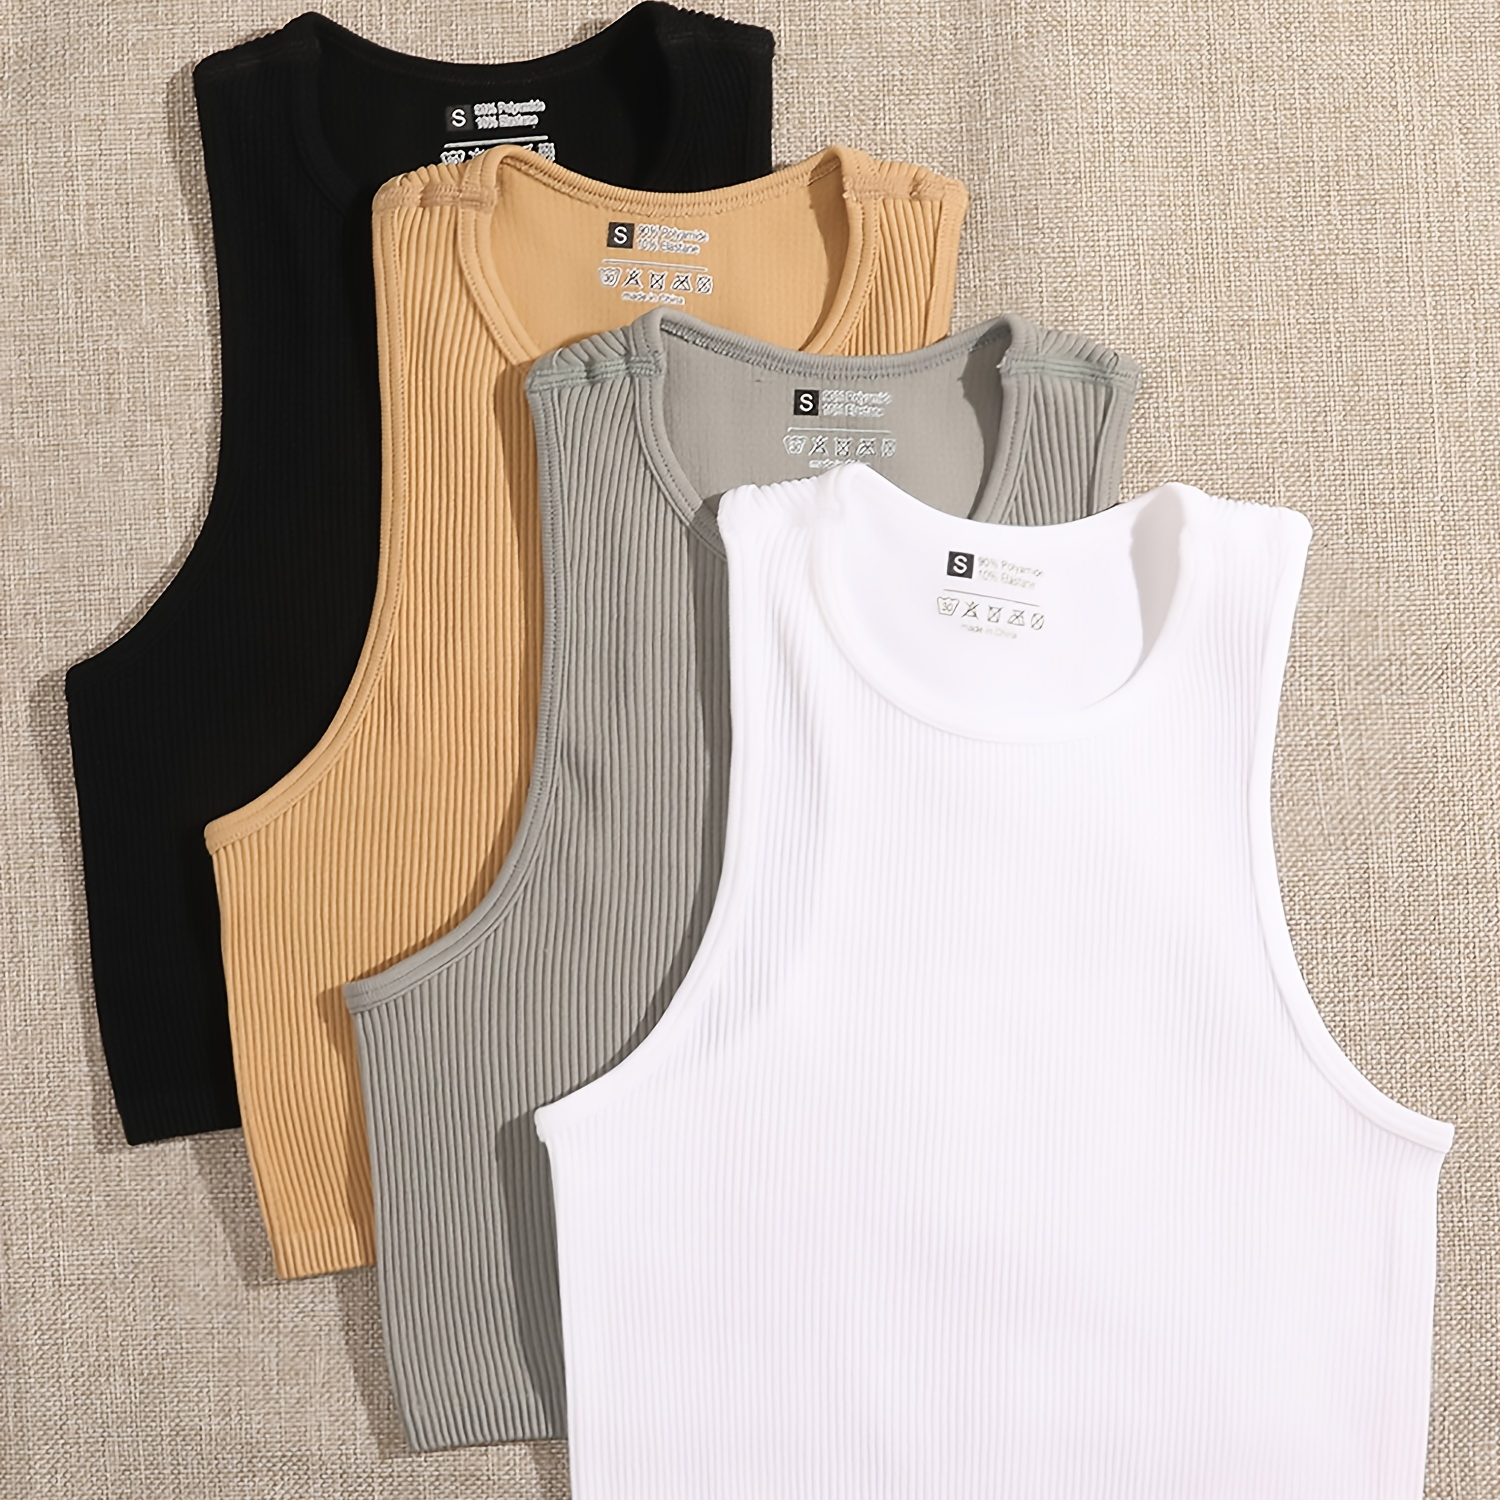 

4-pack Side Ruched Tank Tops - Sleek Y2k Crew Neck Design, Comfy Cotton Blend, Perfect For Summer Casual - Women's Fashion Sports Tops